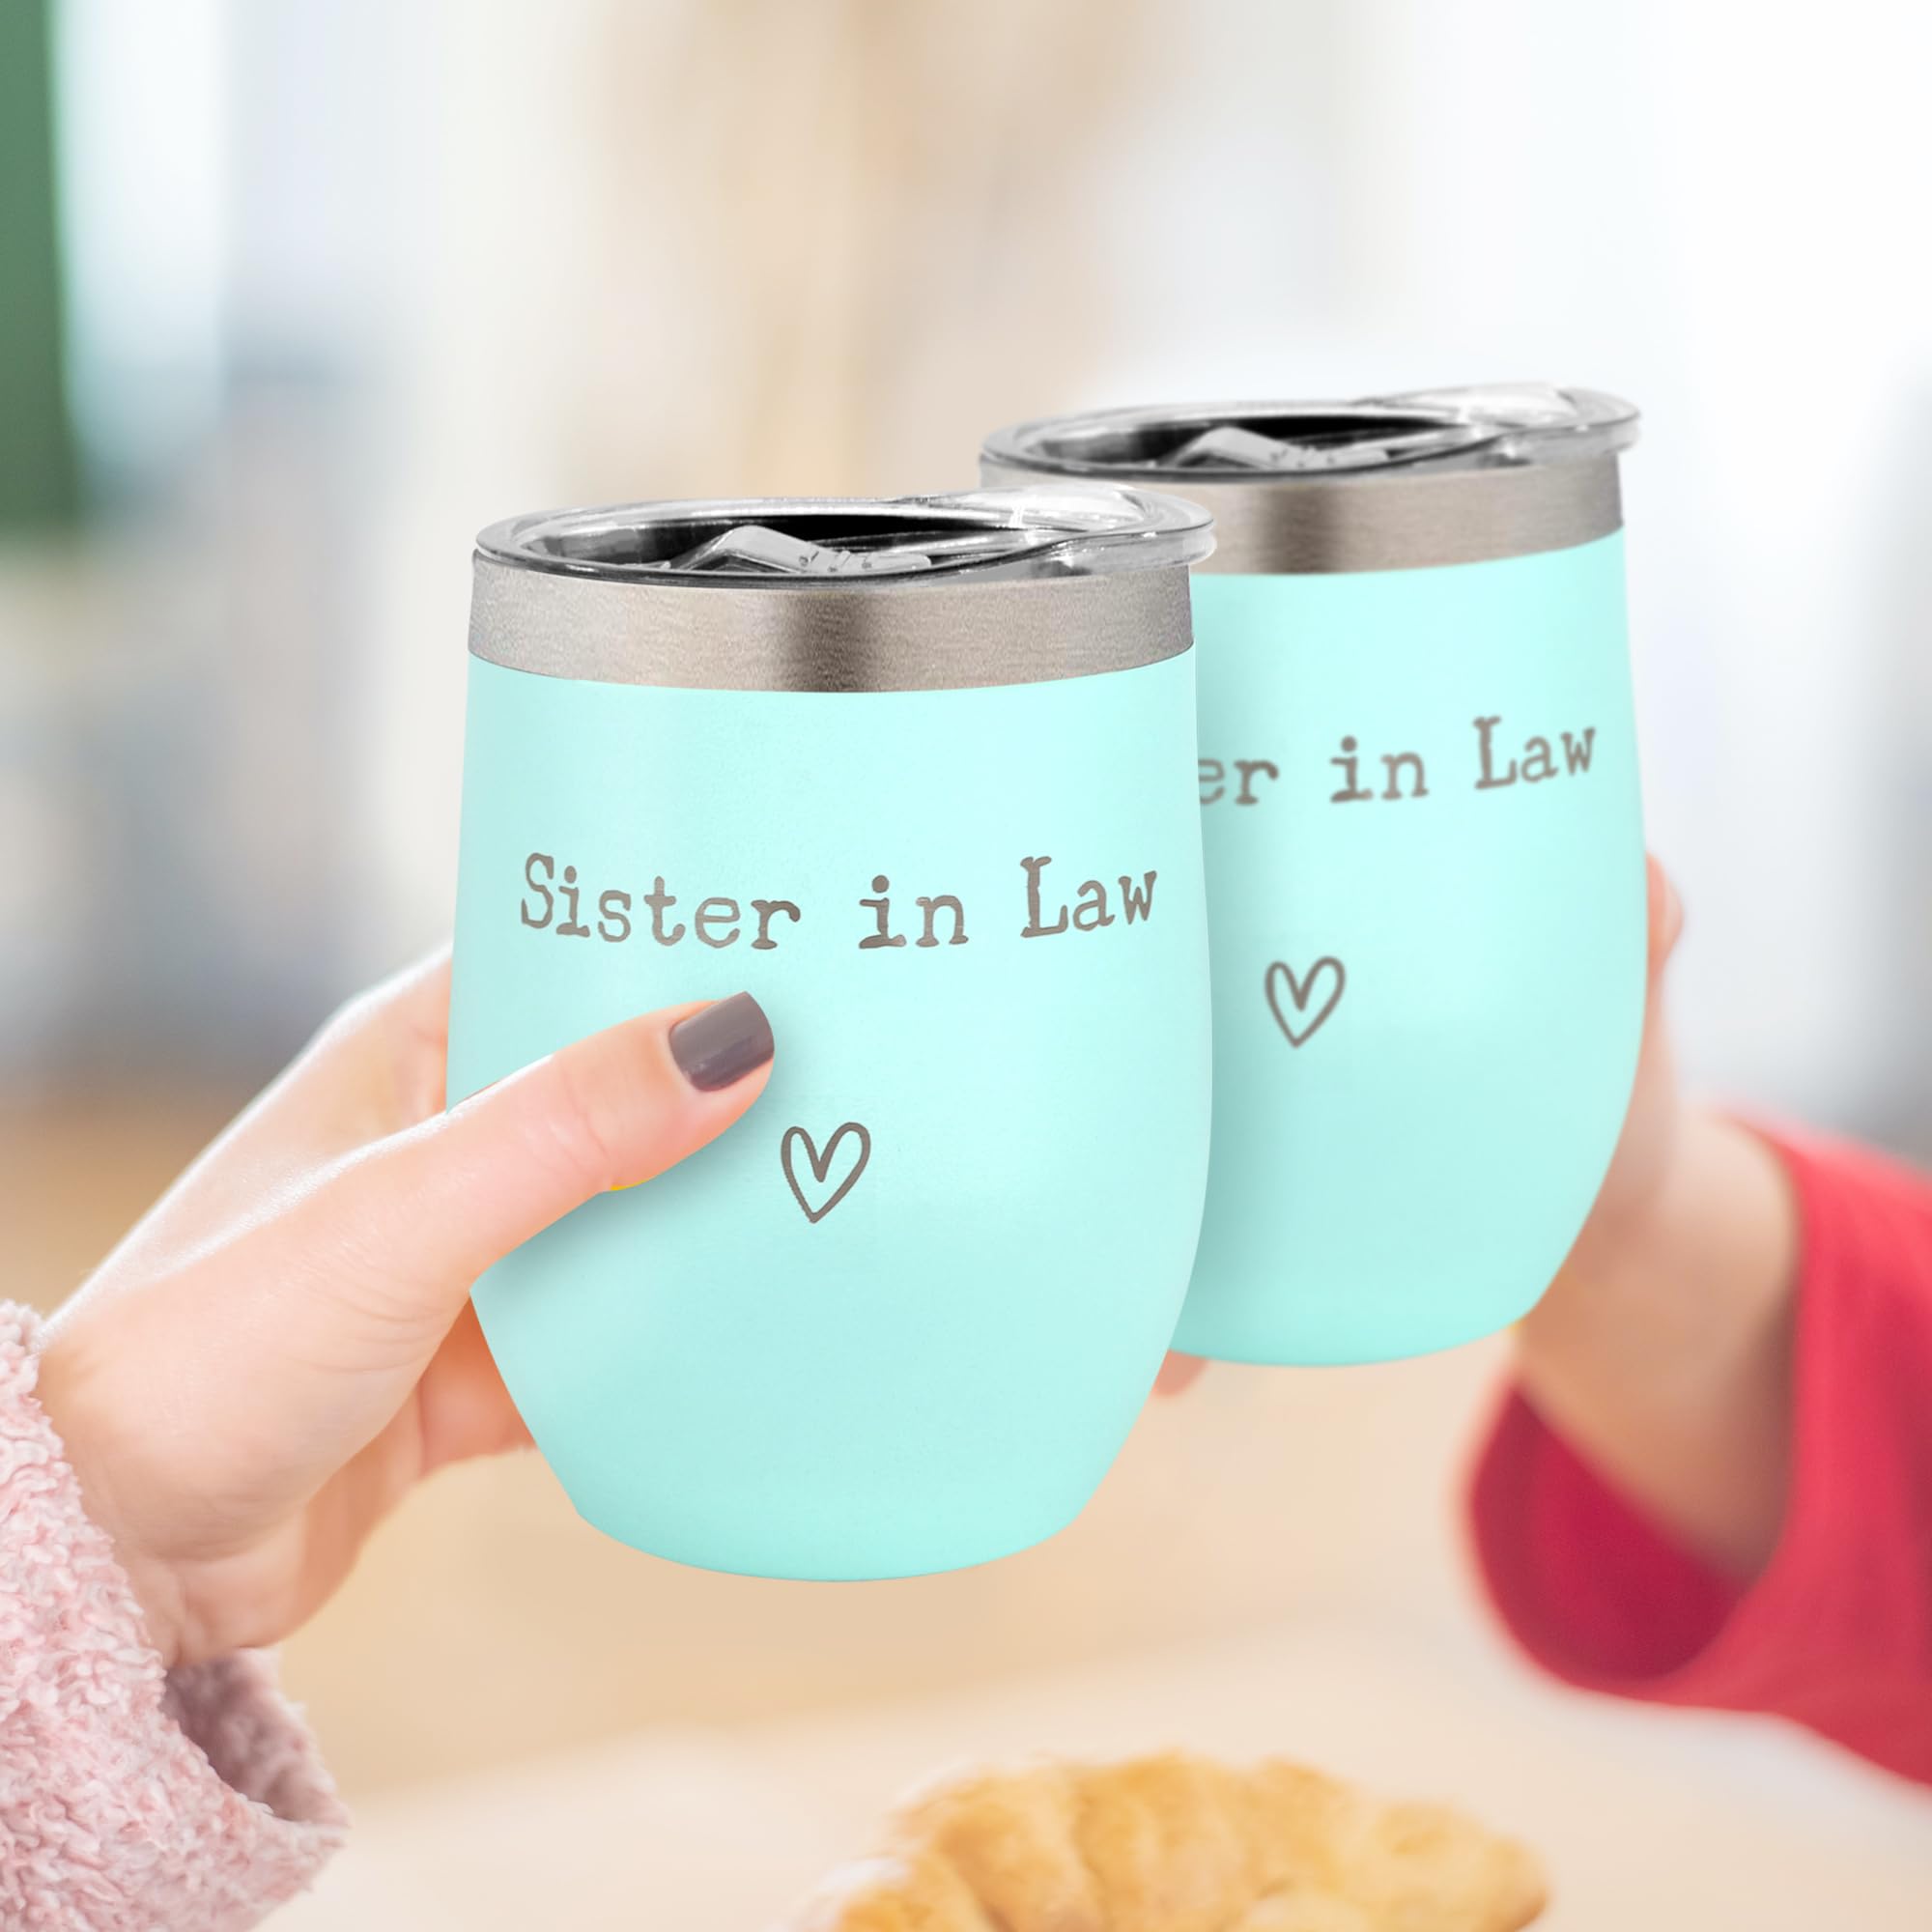 Sister in Law Gifts - Sister in Law Gifts for Birthday,Gifts for Sister in Law, Wedding Gifts for Sister in Law, Sister in Law Gifts from Sister in Law 12 oz Cup Mint